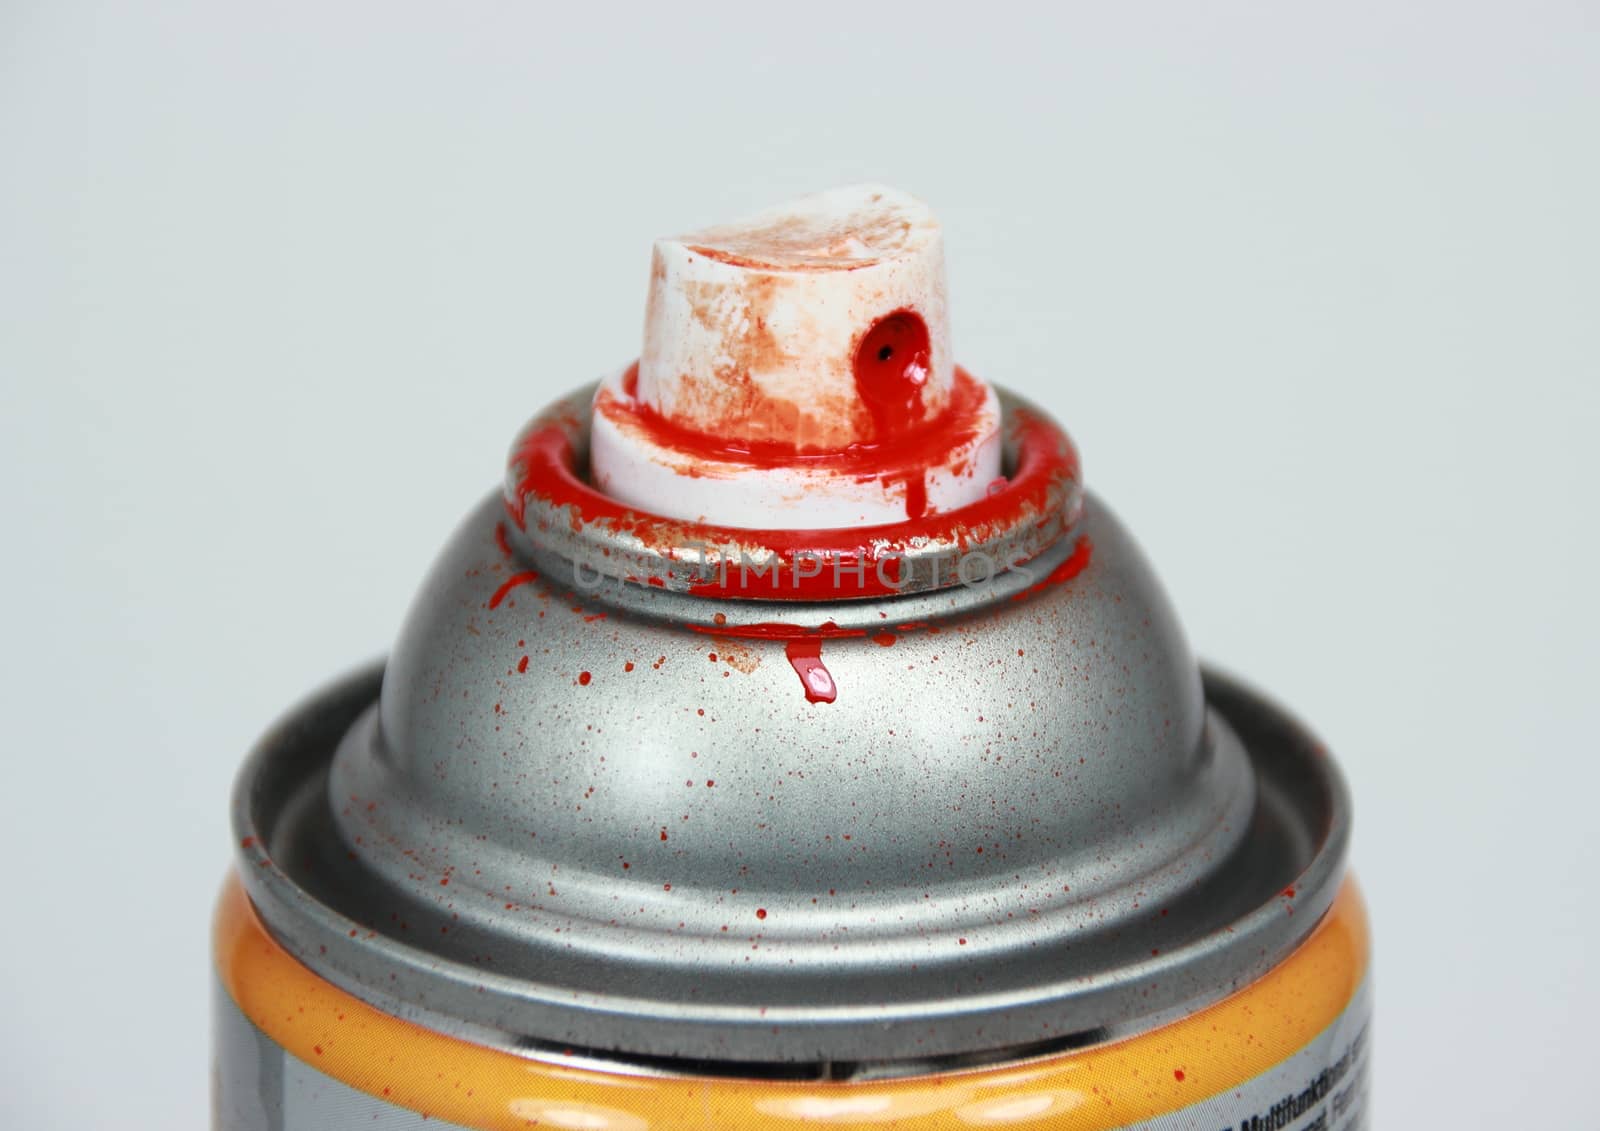 Top of spray can with red paint